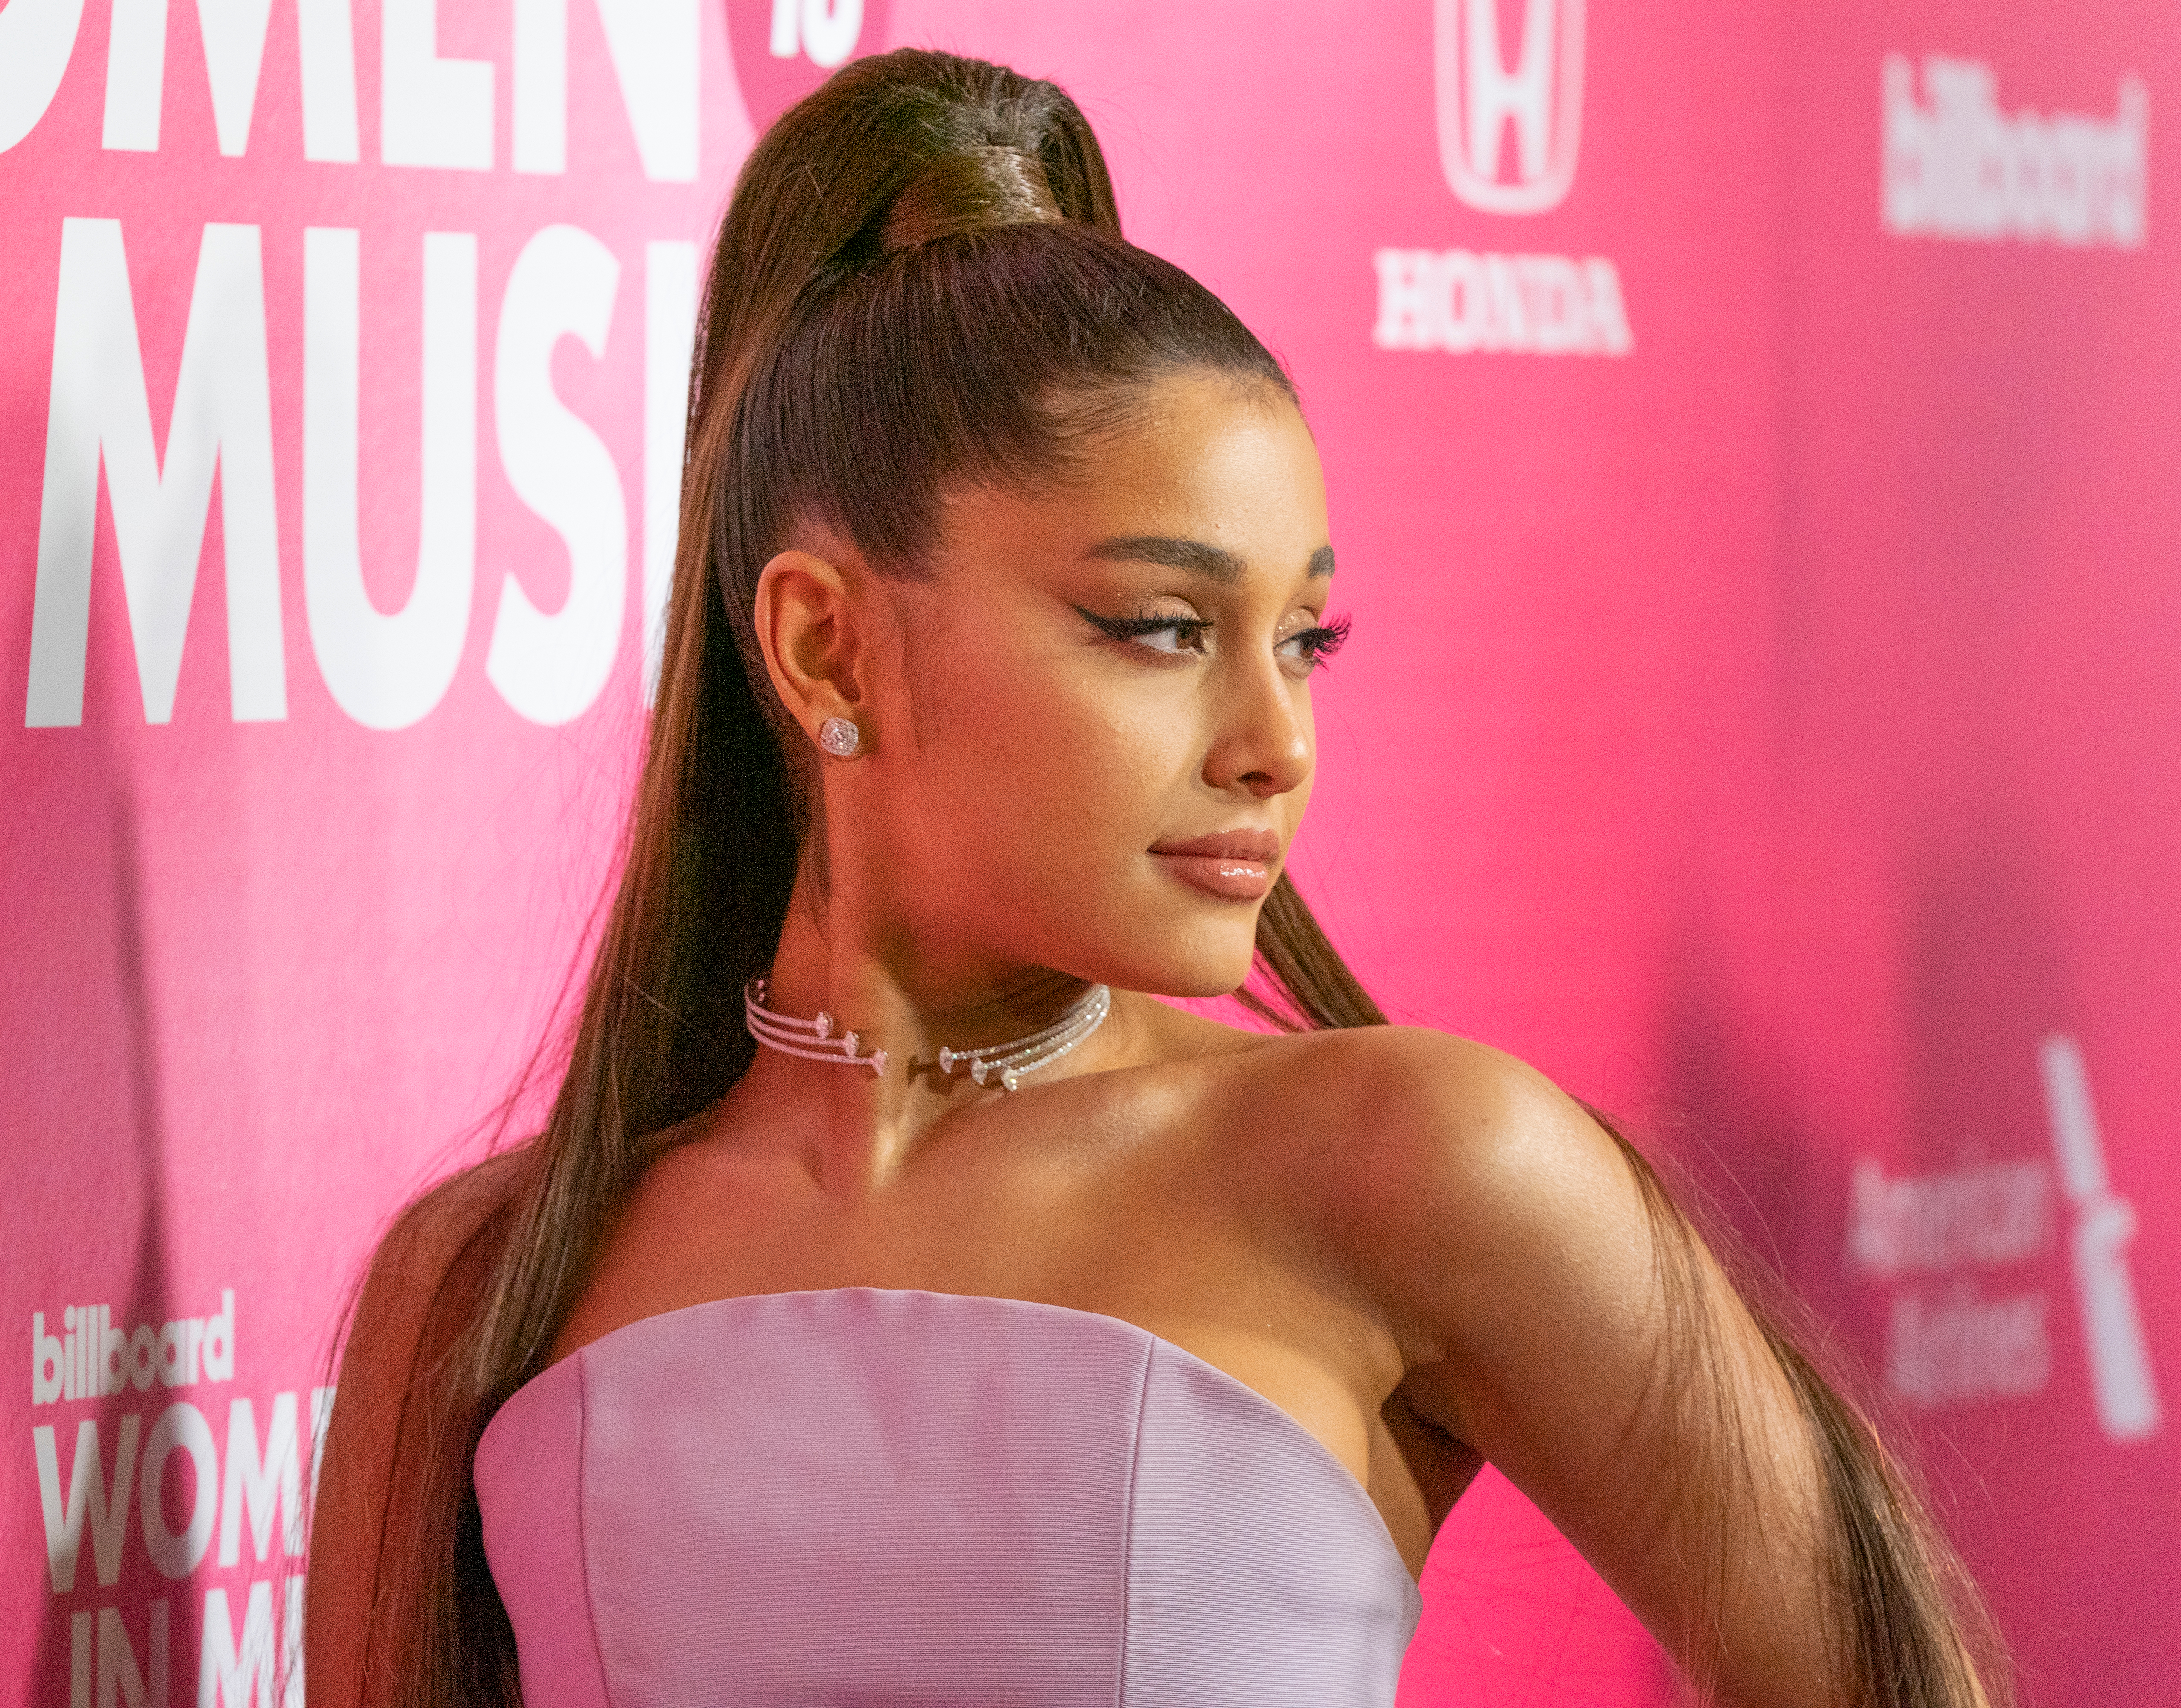 Celebrity Ariana Grande’s Playful Jab at Her Past, Thick Makeup Style, Sparks Adoration from Web Fans